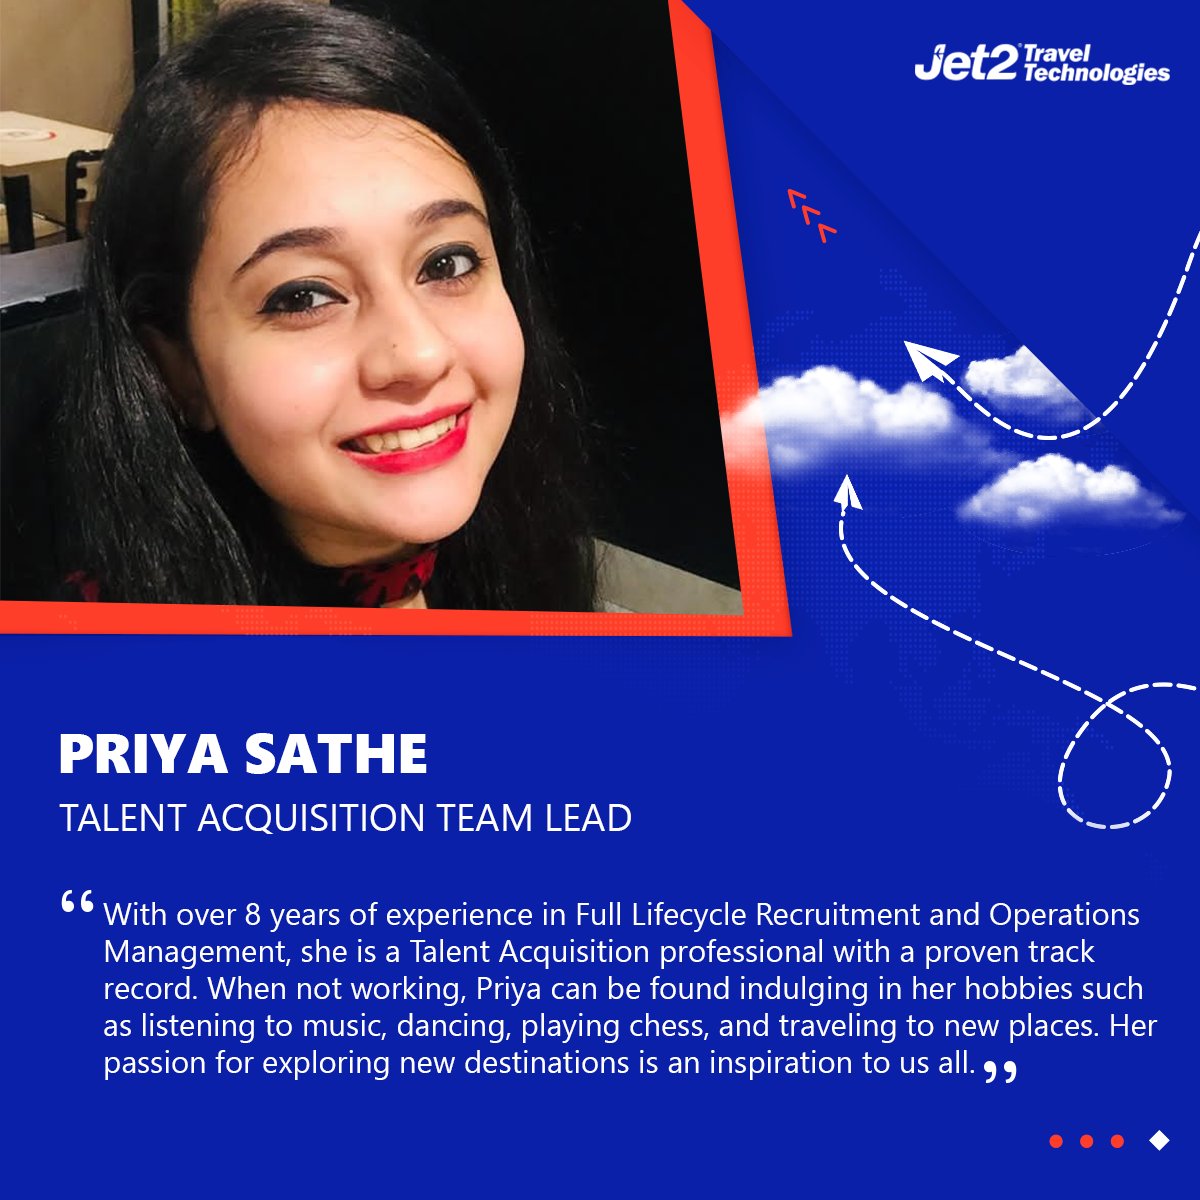 We are excited to welcome Priya Sathe as a part of our #Jet2TT family.

#Jet2TravelTechnologies #LifeAtJet2TT #Employees #Hiring #Techhiring #Talentacquisition #Careers #Appdevelopers #JobAlert #TechJobs #TechCareers #ITHiring #HiringAlerts #HiringImmediately #HiringDevelopers